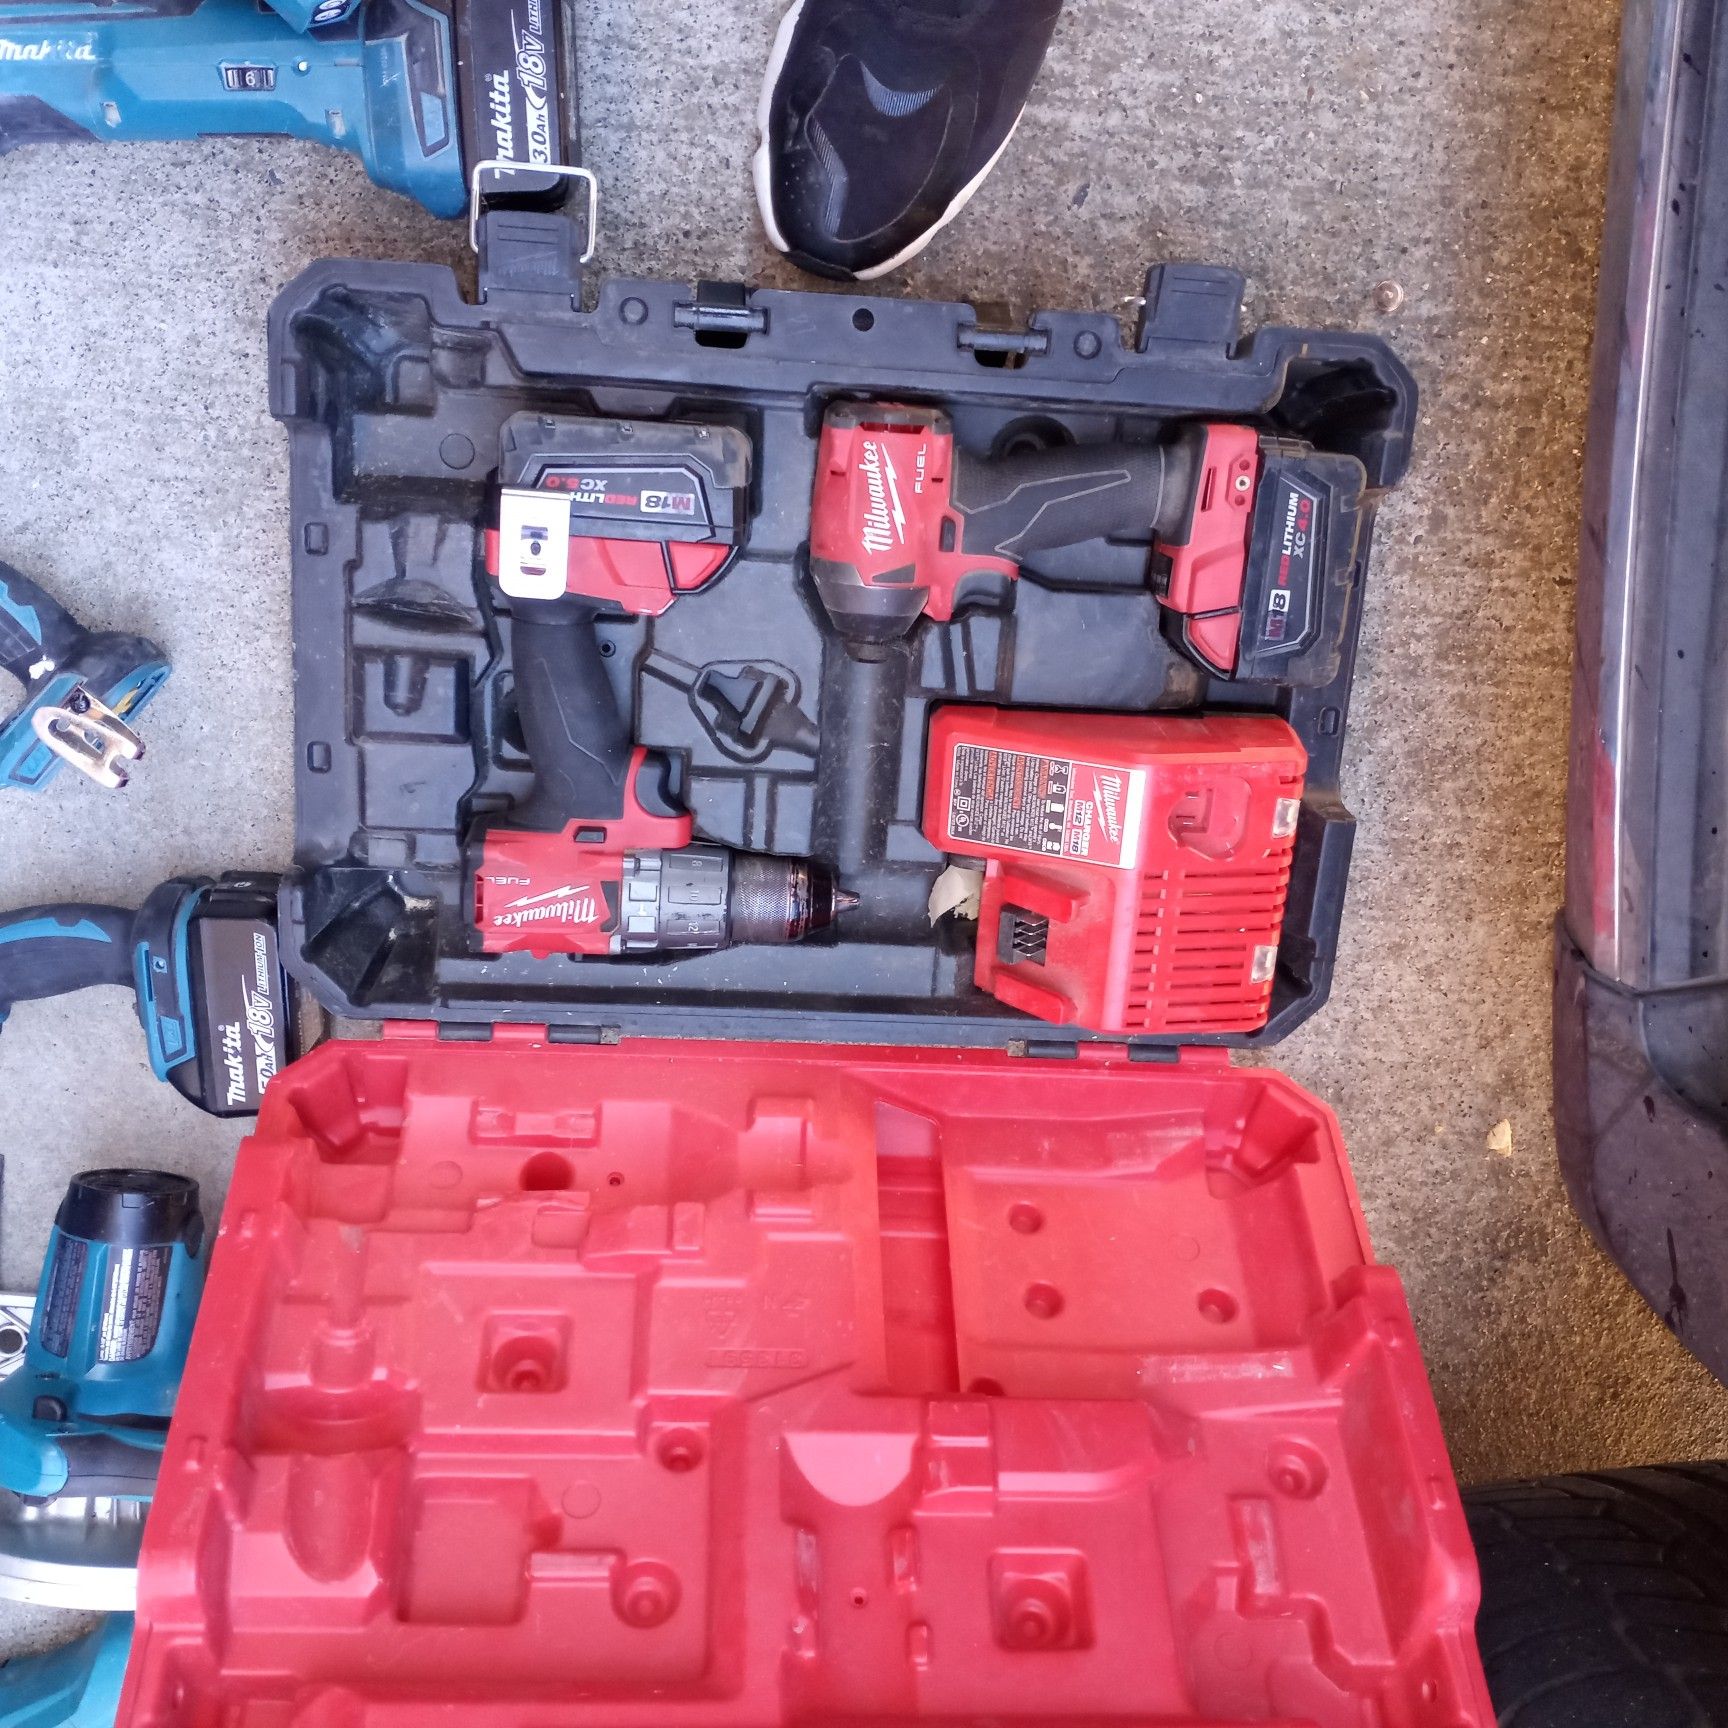 Impact drill and driver set with five hour battery and charger